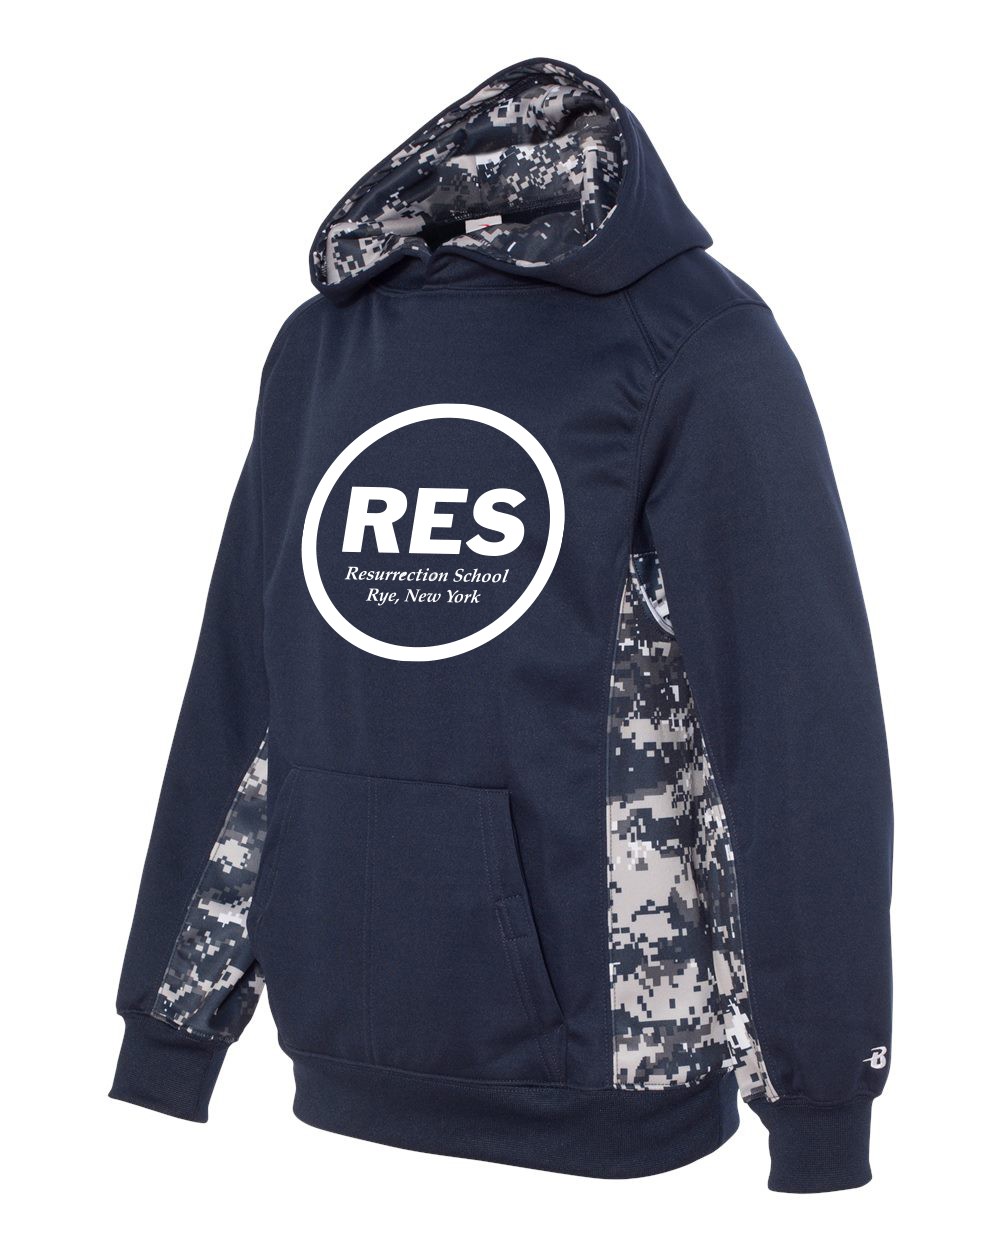 STAFF Resurrection Wear Digital Color Block Hoodie w/ White Logo - Please Allow 2-3 Weeks for Delivery